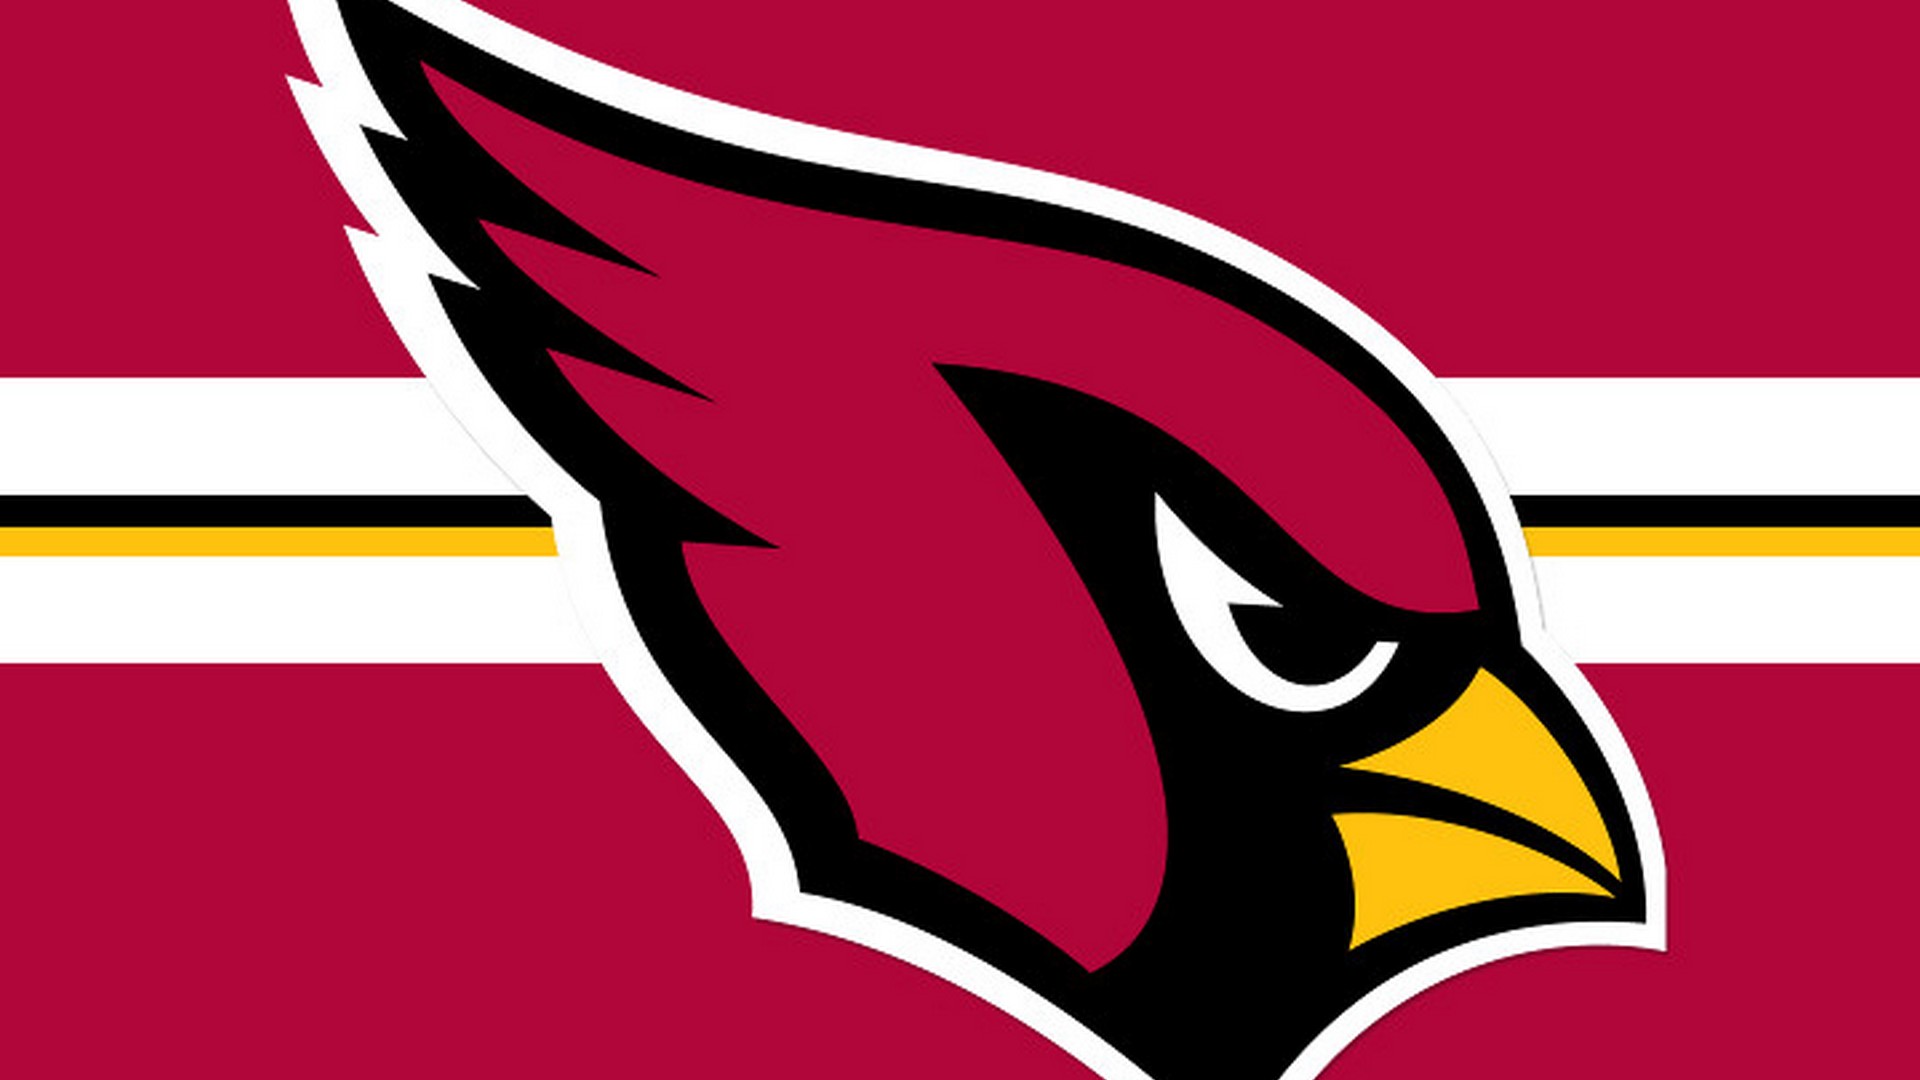 HD Arizona Cardinals Backgrounds With Resolution 1920X1080